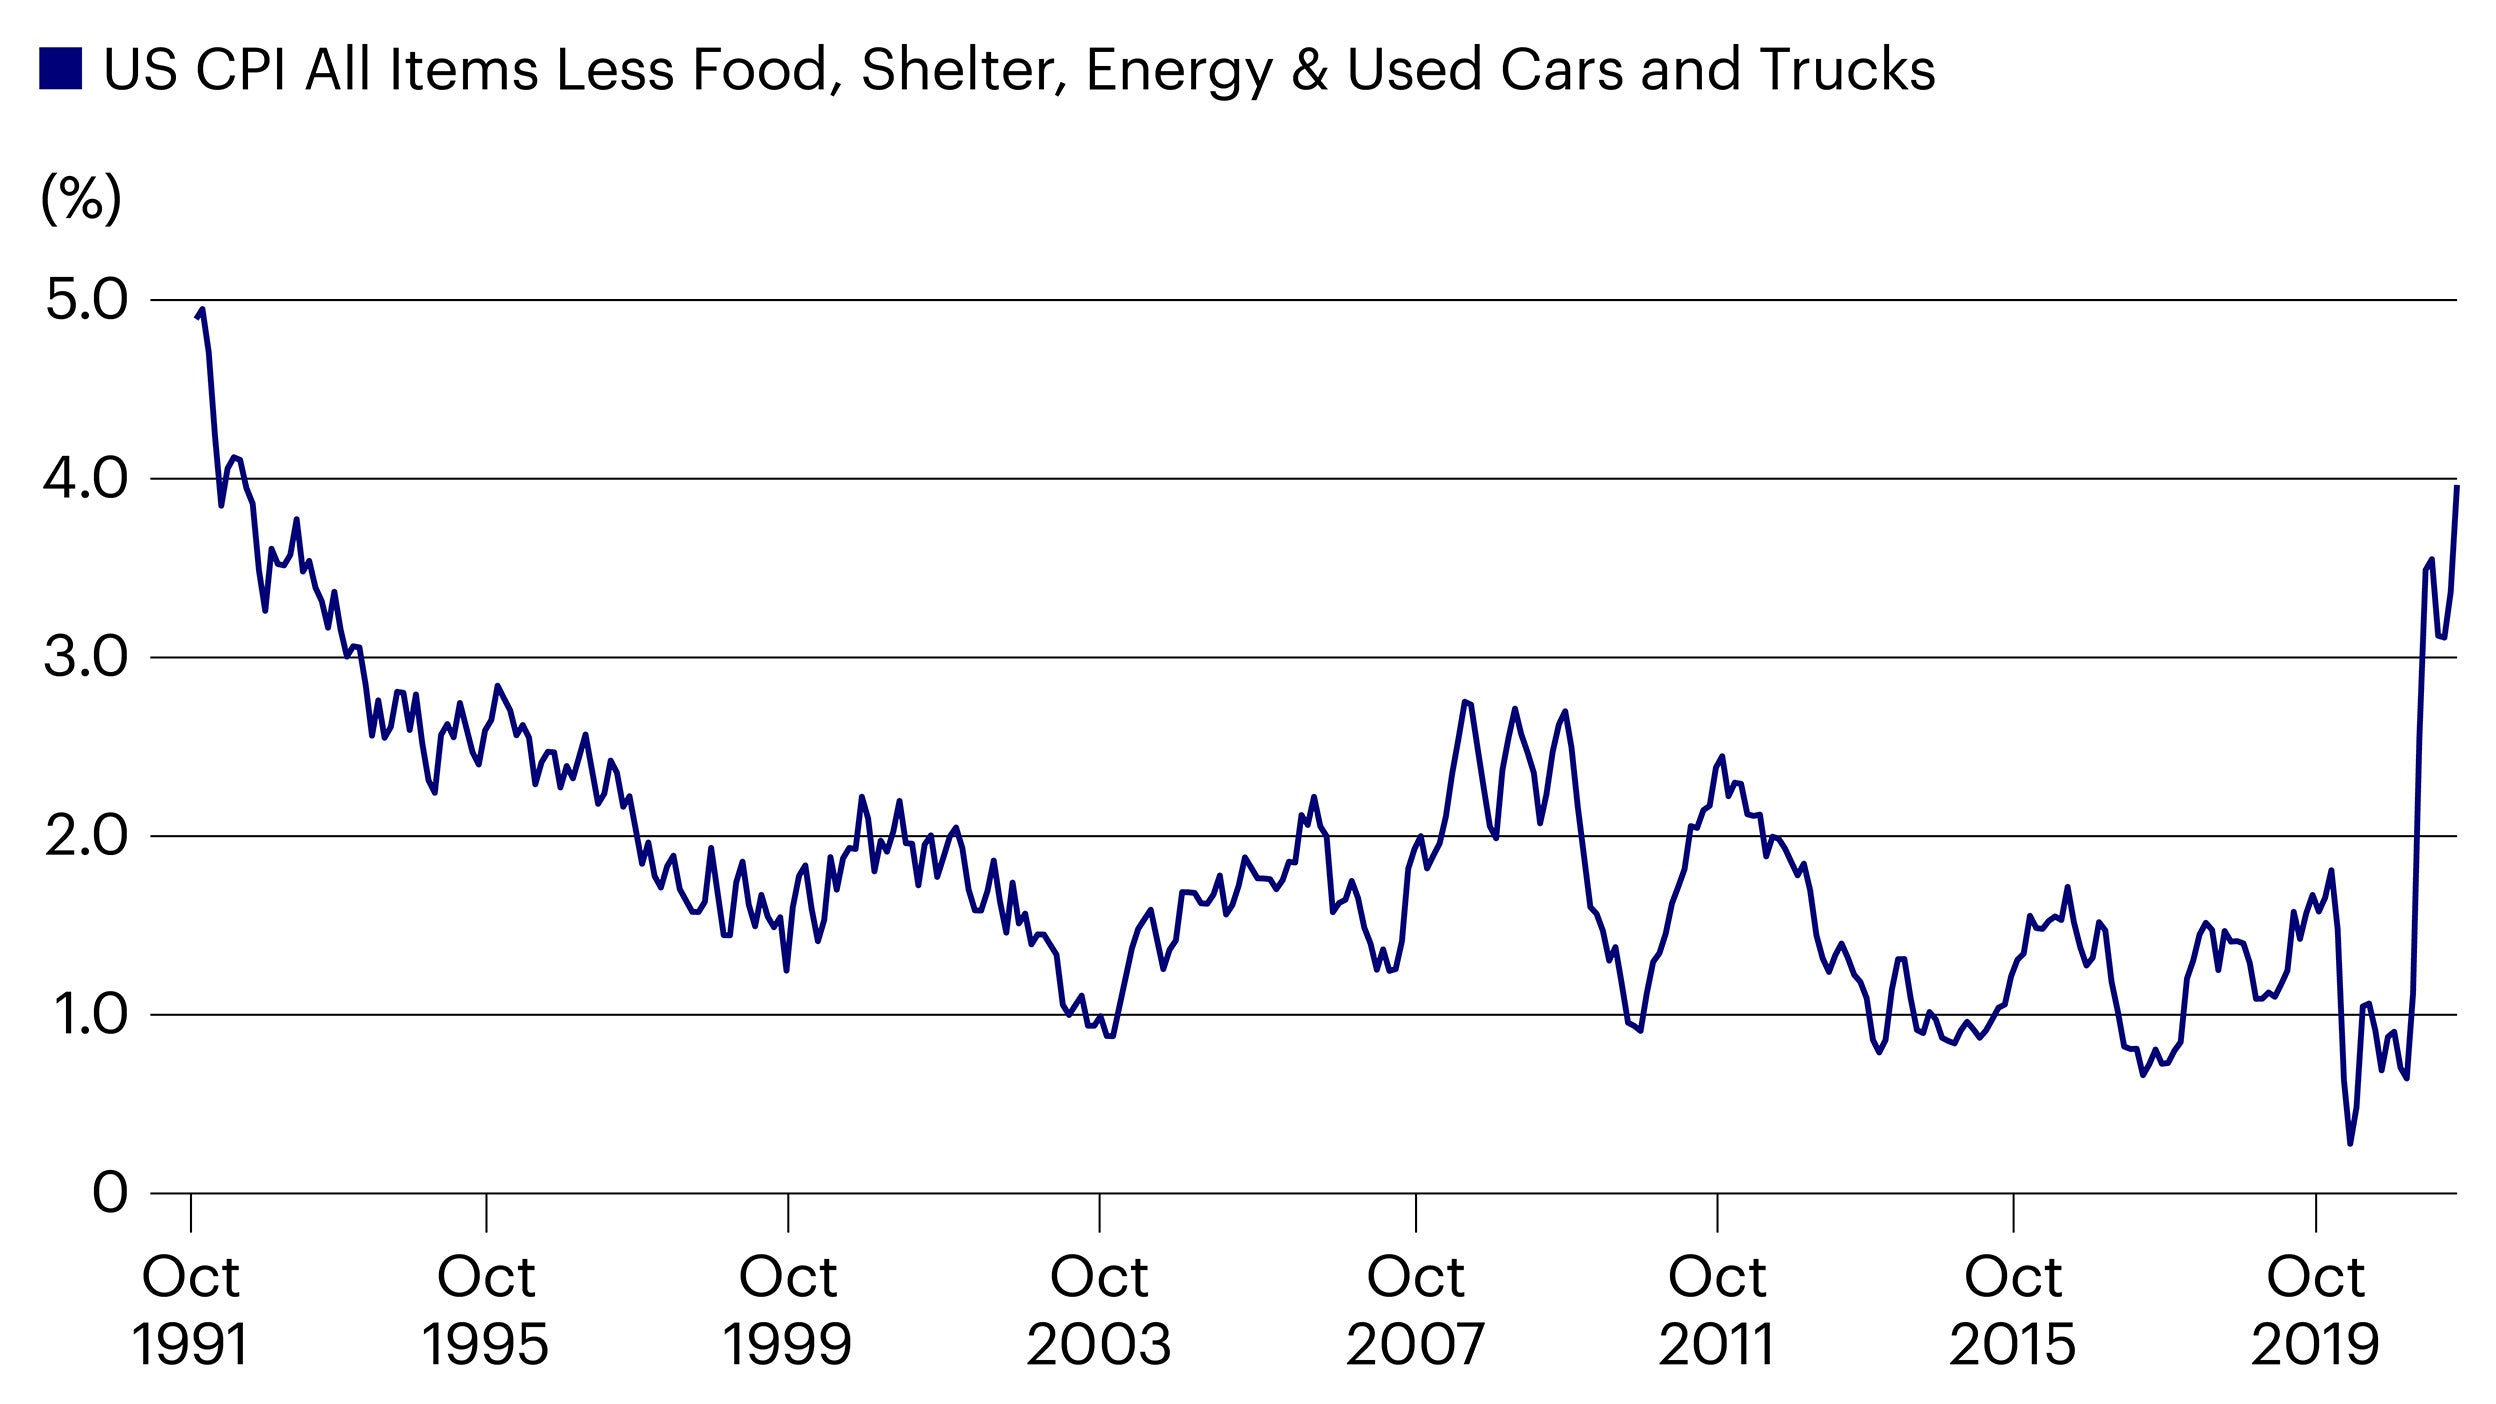 Figure 3 – US CPI all items less food, shelter, energy & used cars and trucks